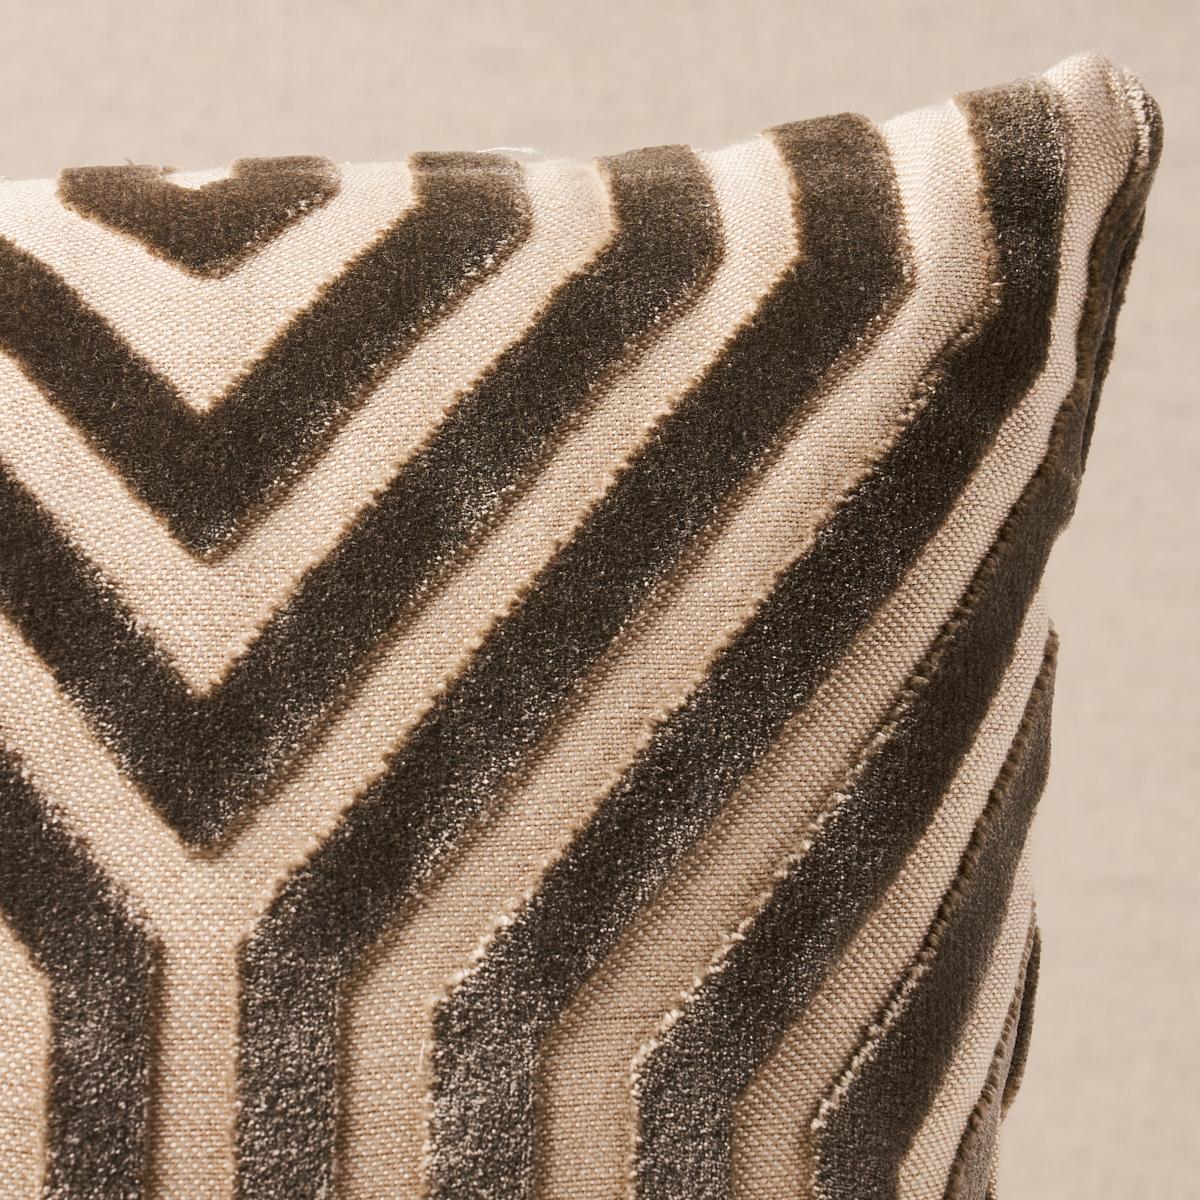 This pillow features Vanderbilt Velvet by Mary McDonald for Schumacher with a knife edge finish. A large-scale, linear design gives this Italian cut velvet fabric a graphic sensibility. The silk-like pile adds extra dimension and a luxurious hand to